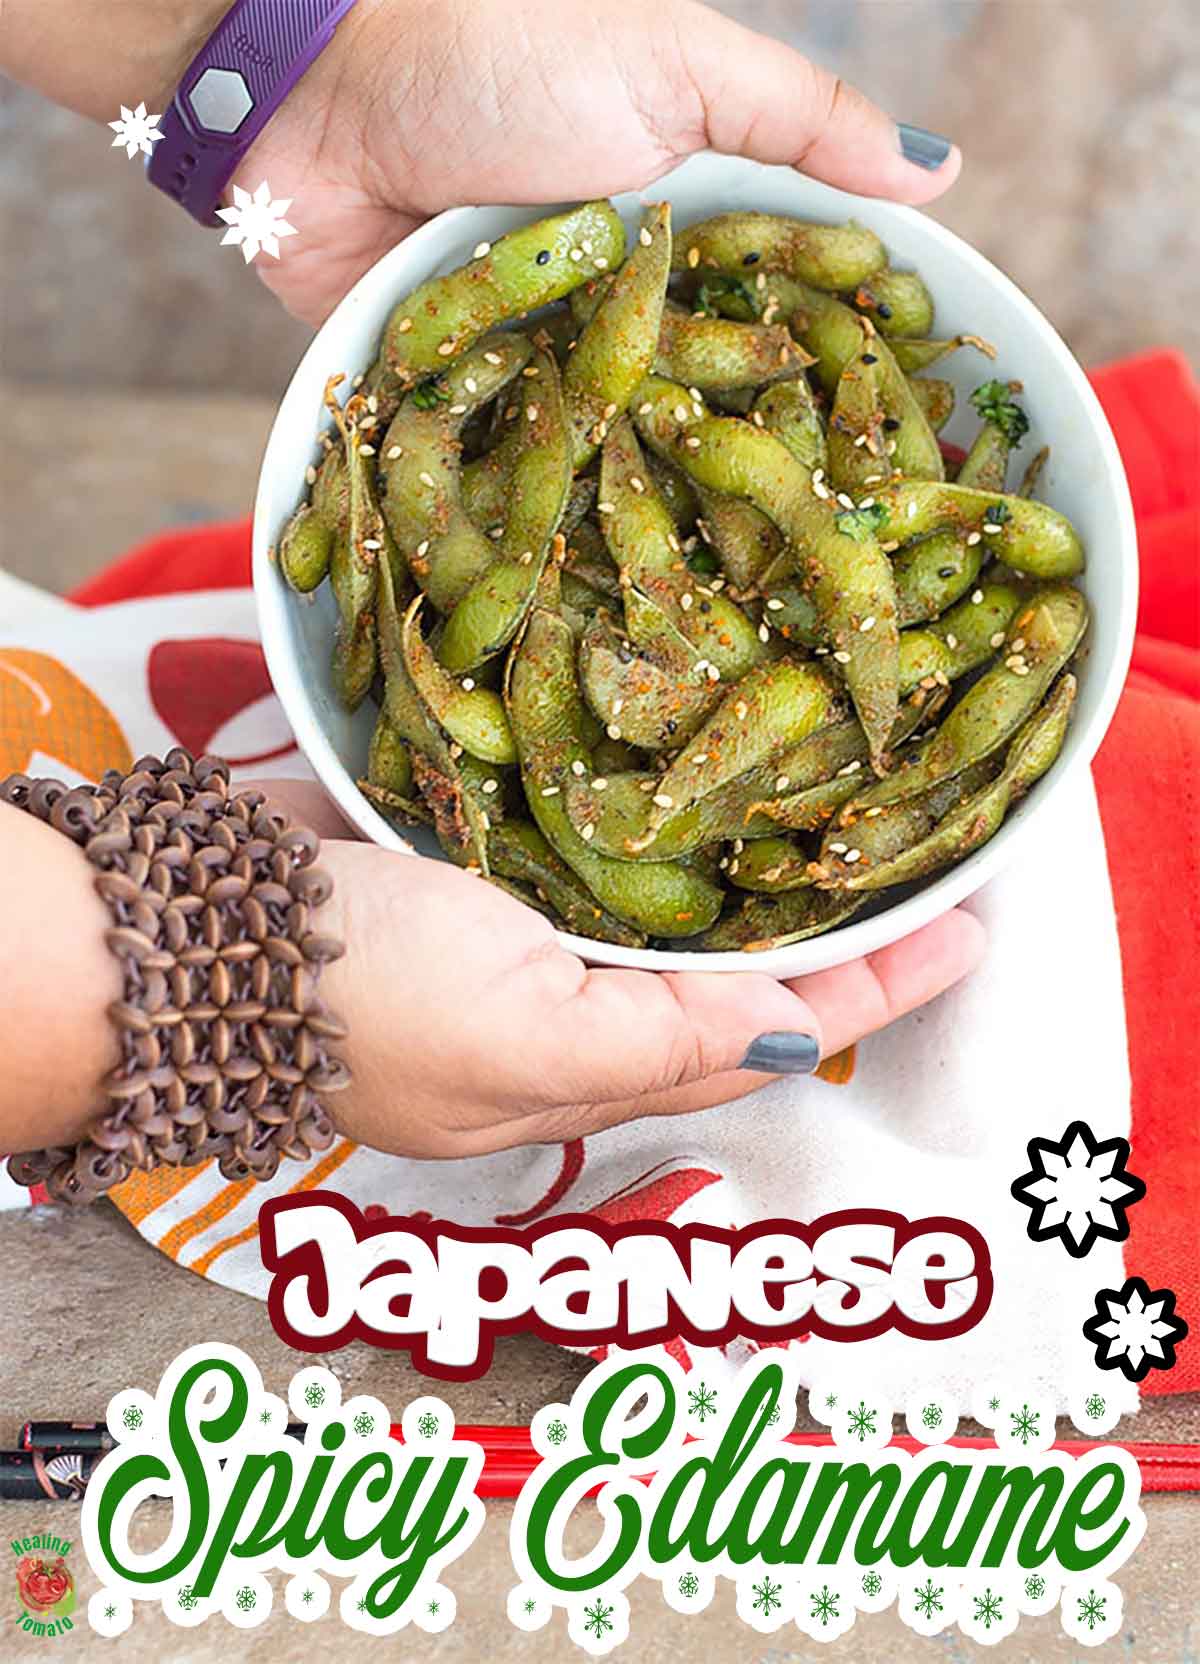 Front view of the author's hands holding a white bowl filled with edamame pods